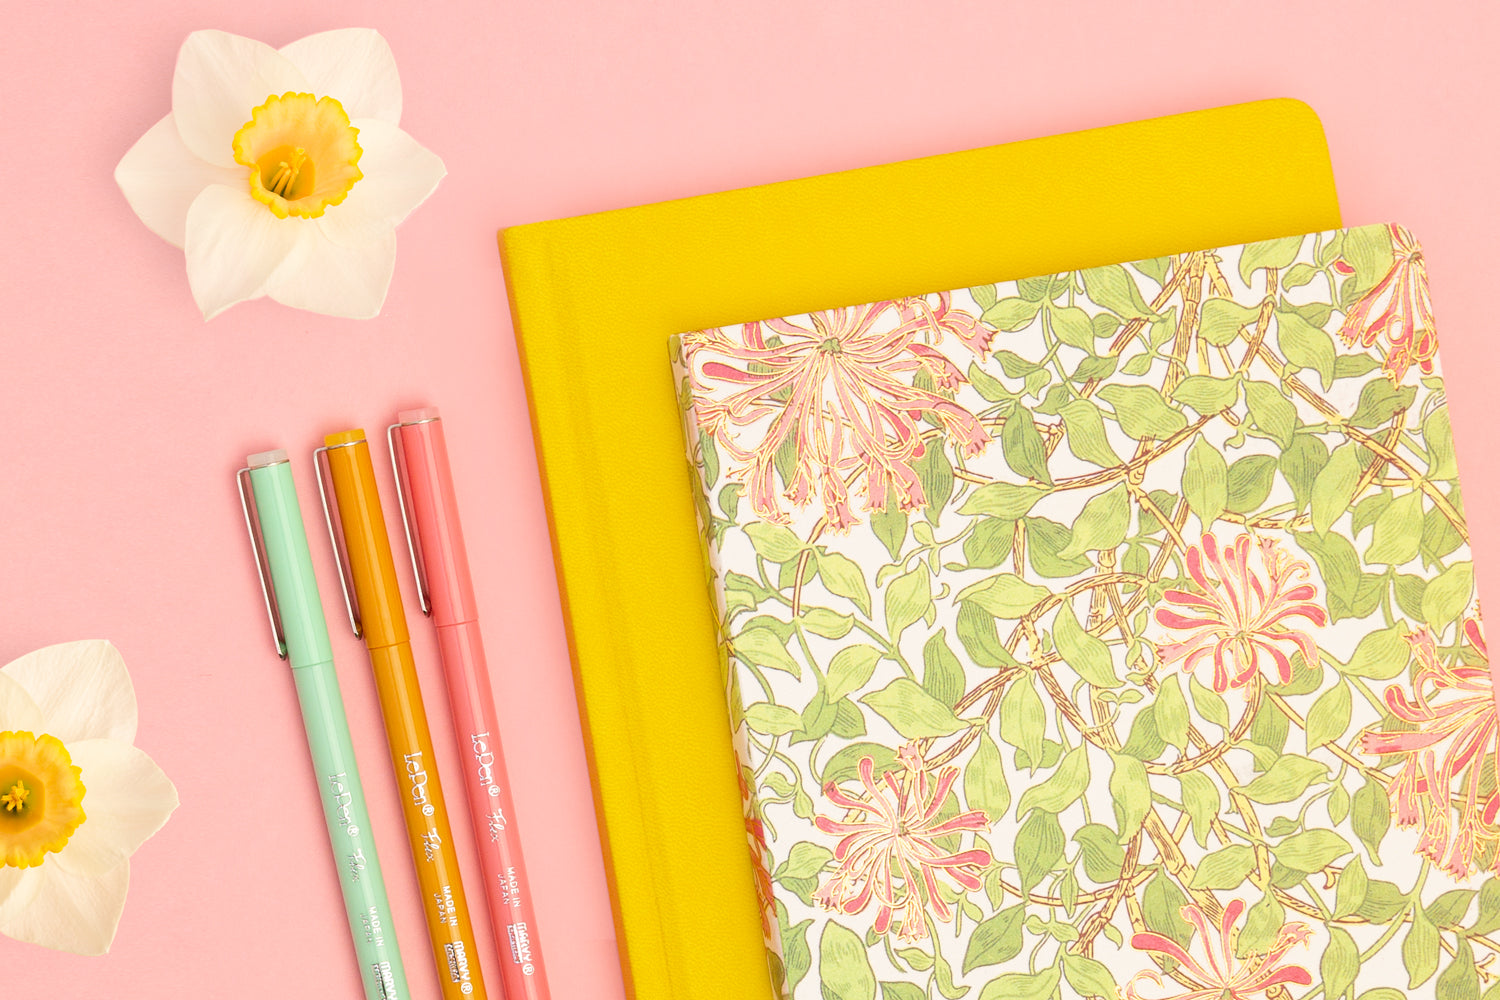 A floral notebook sits atop a yellow notebook, next to colorful pens and daisies on a pink table